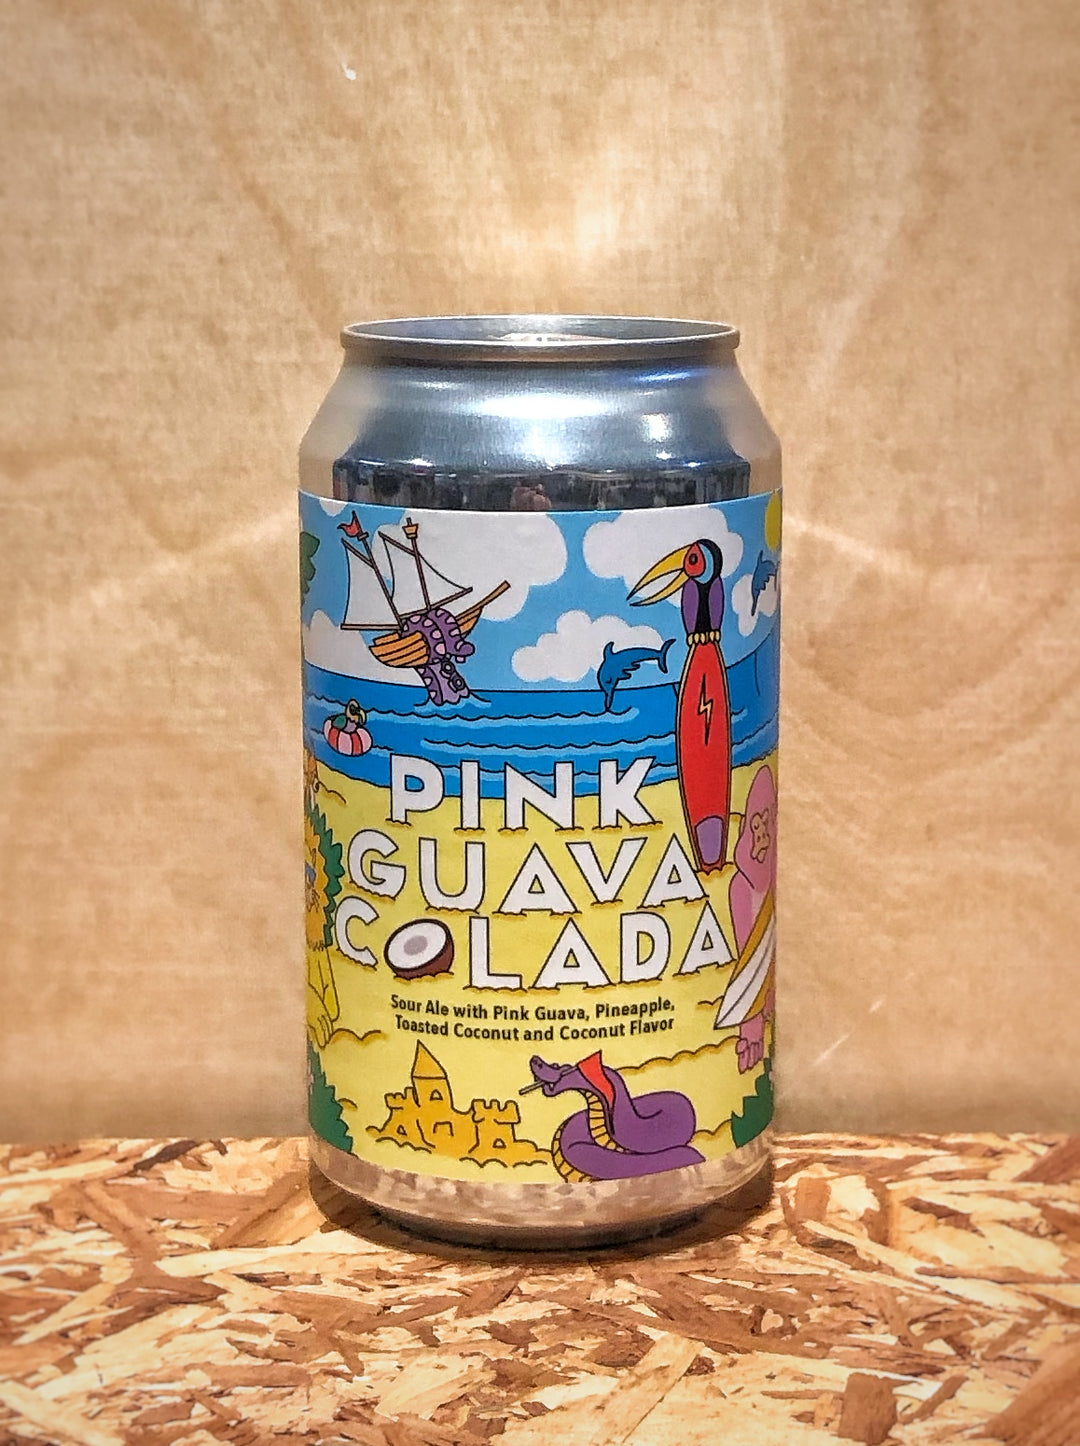 Prairie Artisan Ales 'Pink Guava Colada' Sour Ale with Pink Guava, Pineapple, and Toasted Coconut (Oklahoma City, OK)